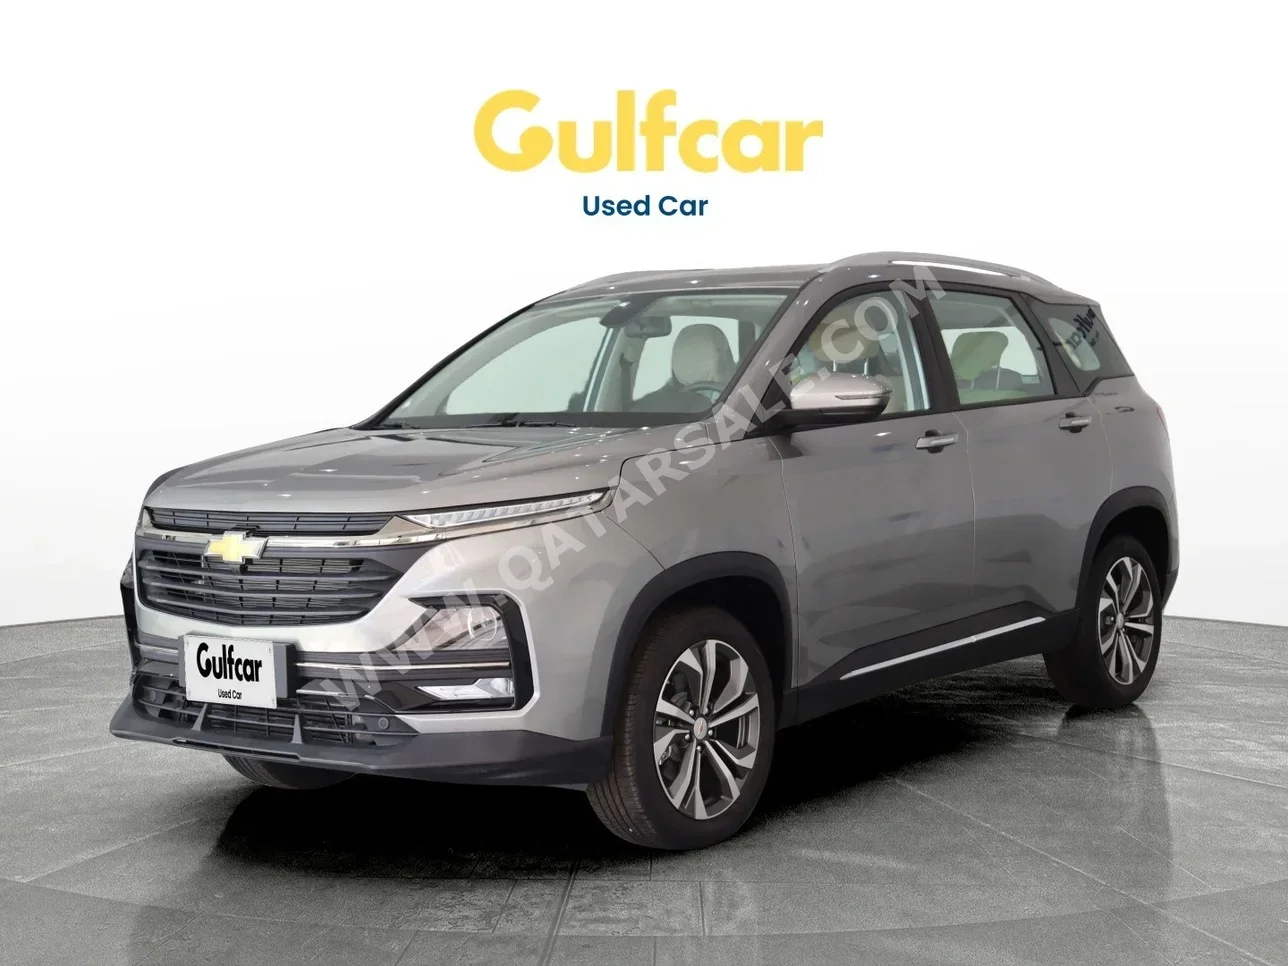 Chevrolet  Captiva  Premier  2024  Automatic  16 Km  4 Cylinder  Four Wheel Drive (4WD)  SUV  Silver  With Warranty